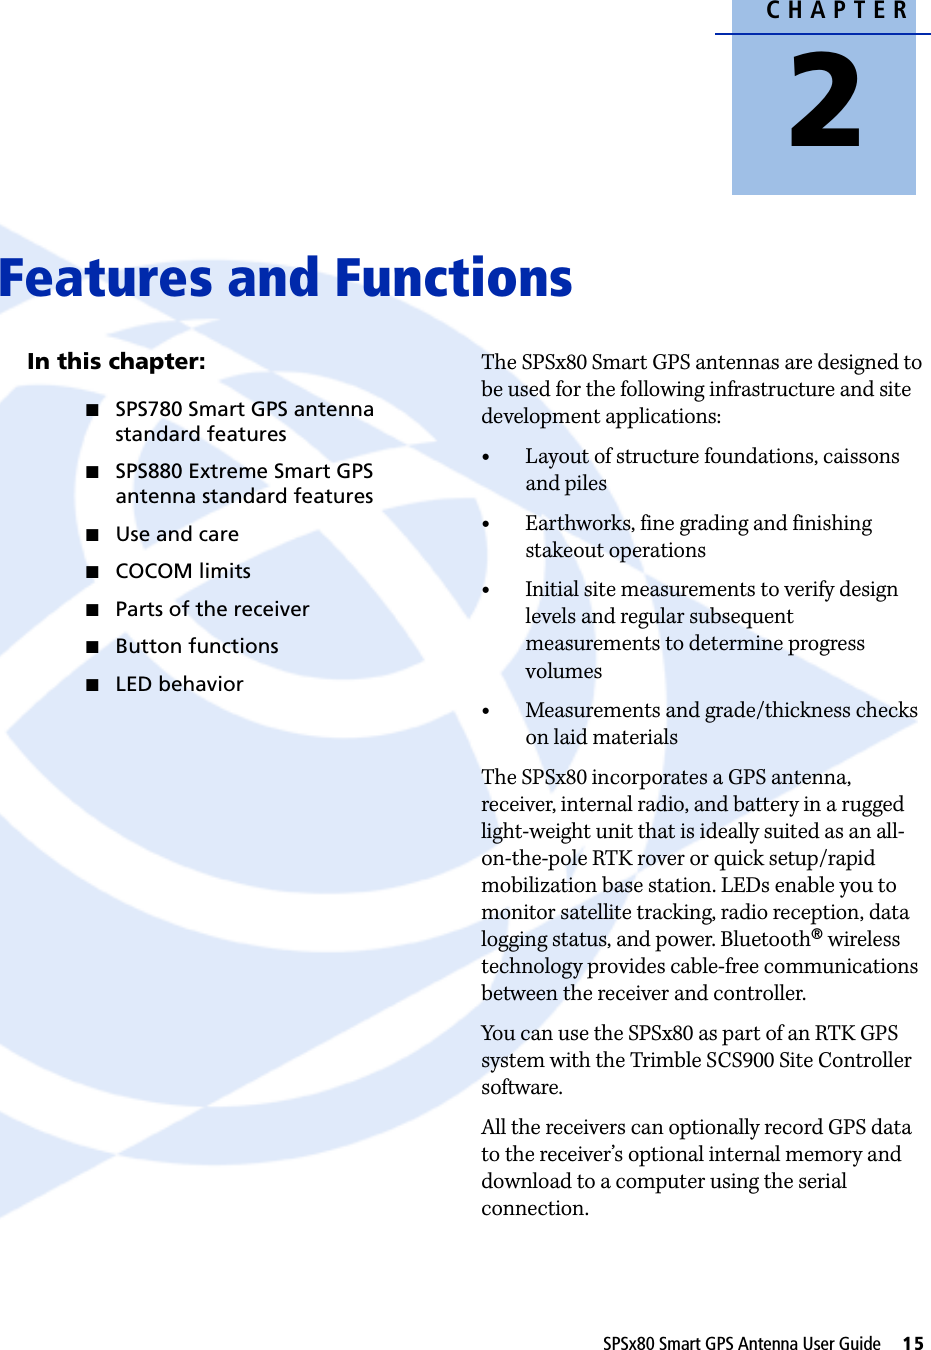 CHAPTER2SPSx80 Smart GPS Antenna User Guide     15Features and Functions 2In this chapter:QSPS780 Smart GPS antenna standard featuresQSPS880 Extreme Smart GPS antenna standard featuresQUse and careQCOCOM limitsQParts of the receiverQButton functionsQLED behaviorThe SPSx80 Smart GPS antennas are designed to be used for the following infrastructure and site development applications:•Layout of structure foundations, caissons and piles•Earthworks, fine grading and finishing stakeout operations•Initial site measurements to verify design levels and regular subsequent measurements to determine progress volumes•Measurements and grade/thickness checks on laid materialsThe SPSx80 incorporates a GPS antenna, receiver, internal radio, and battery in a rugged light-weight unit that is ideally suited as an all-on-the-pole RTK rover or quick setup/rapid mobilization base station. LEDs enable you to monitor satellite tracking, radio reception, data logging status, and power. Bluetooth® wireless technology provides cable-free communications between the receiver and controller. You can use the SPSx80 as part of an RTK GPS system with the Trimble SCS900 Site Controller software.All the receivers can optionally record GPS data to the receiver’s optional internal memory and download to a computer using the serial connection.